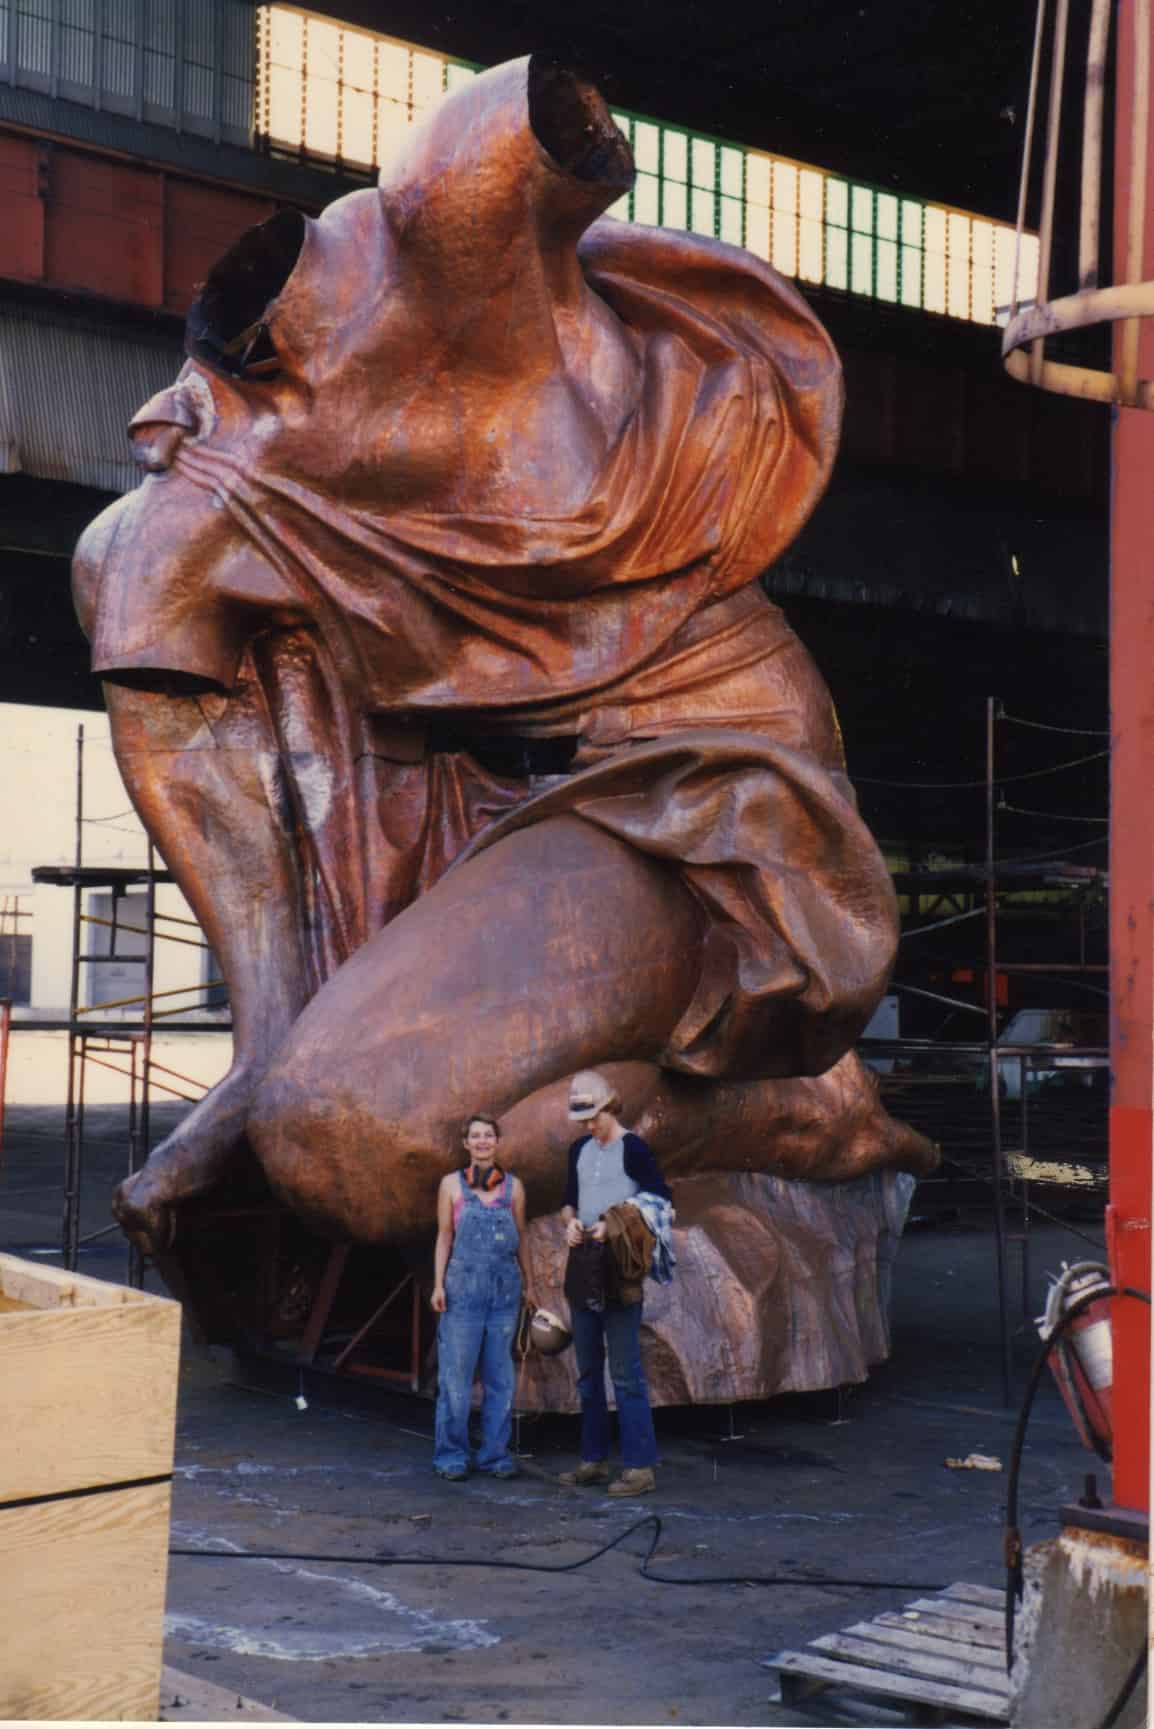 Jo Haemer, left, and Greg Pettingill in front of Ray Kaskey's Portlandia sculpture. Photo provided by Jo Haemer.